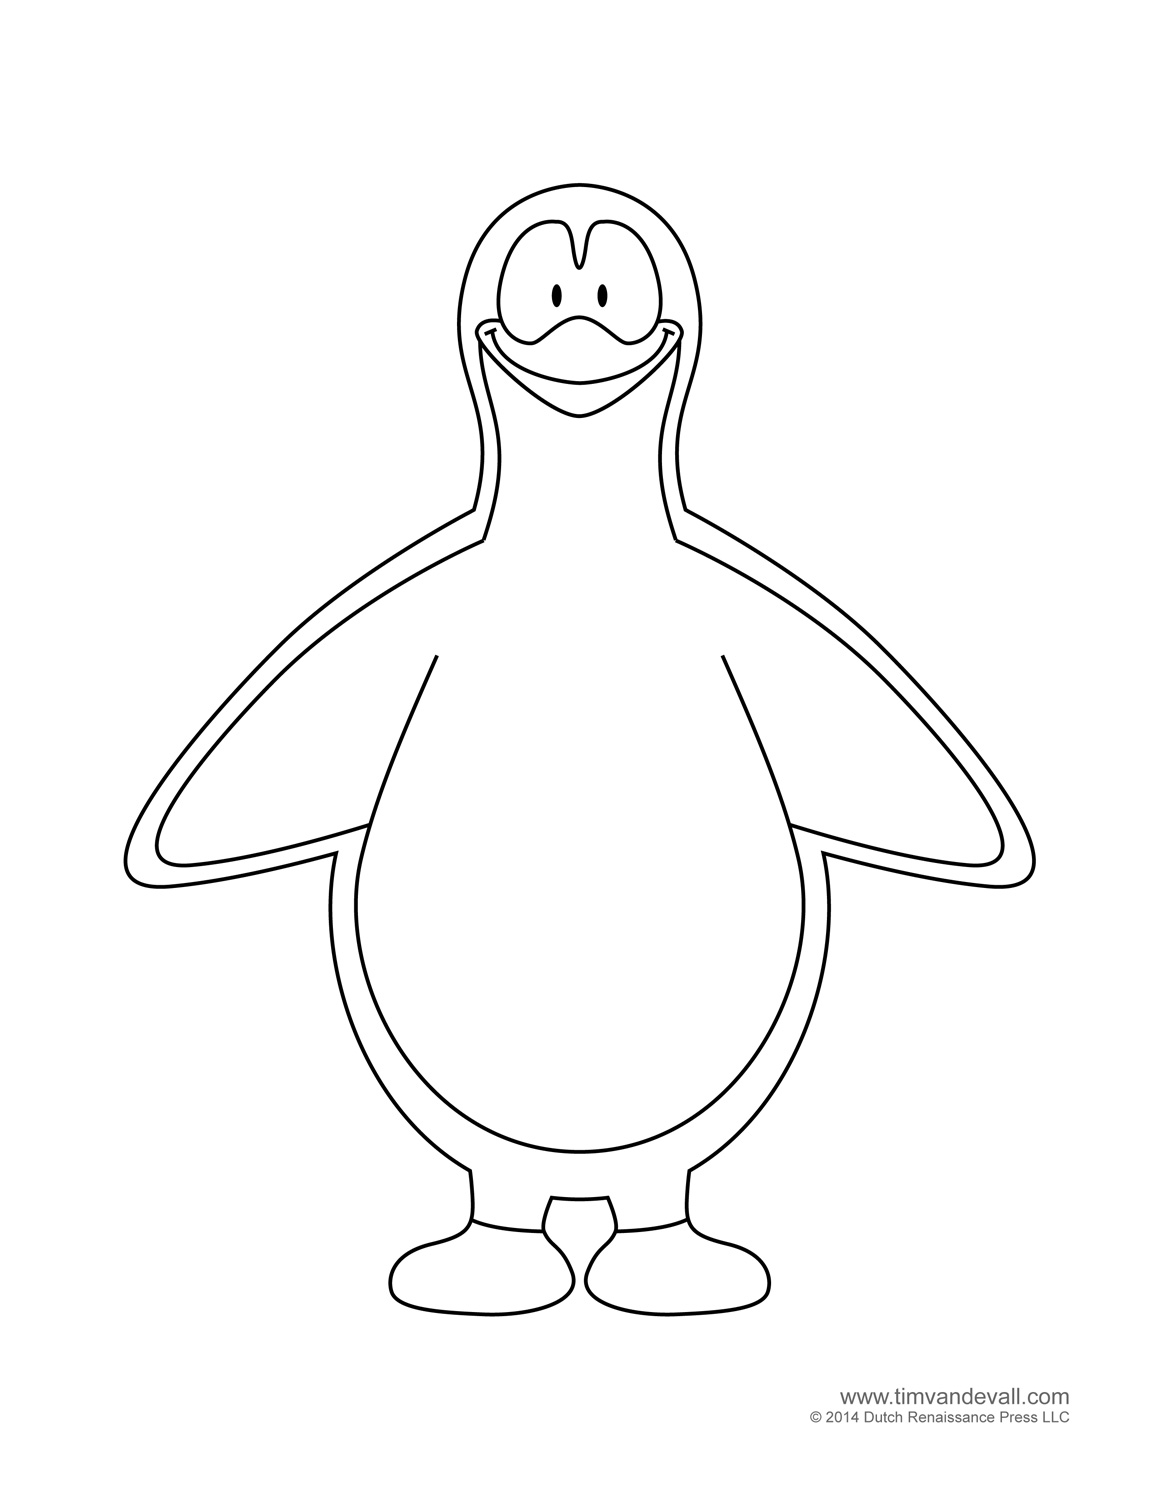 penguin-template-coloring-pages-clipart-pictures-and-crafts